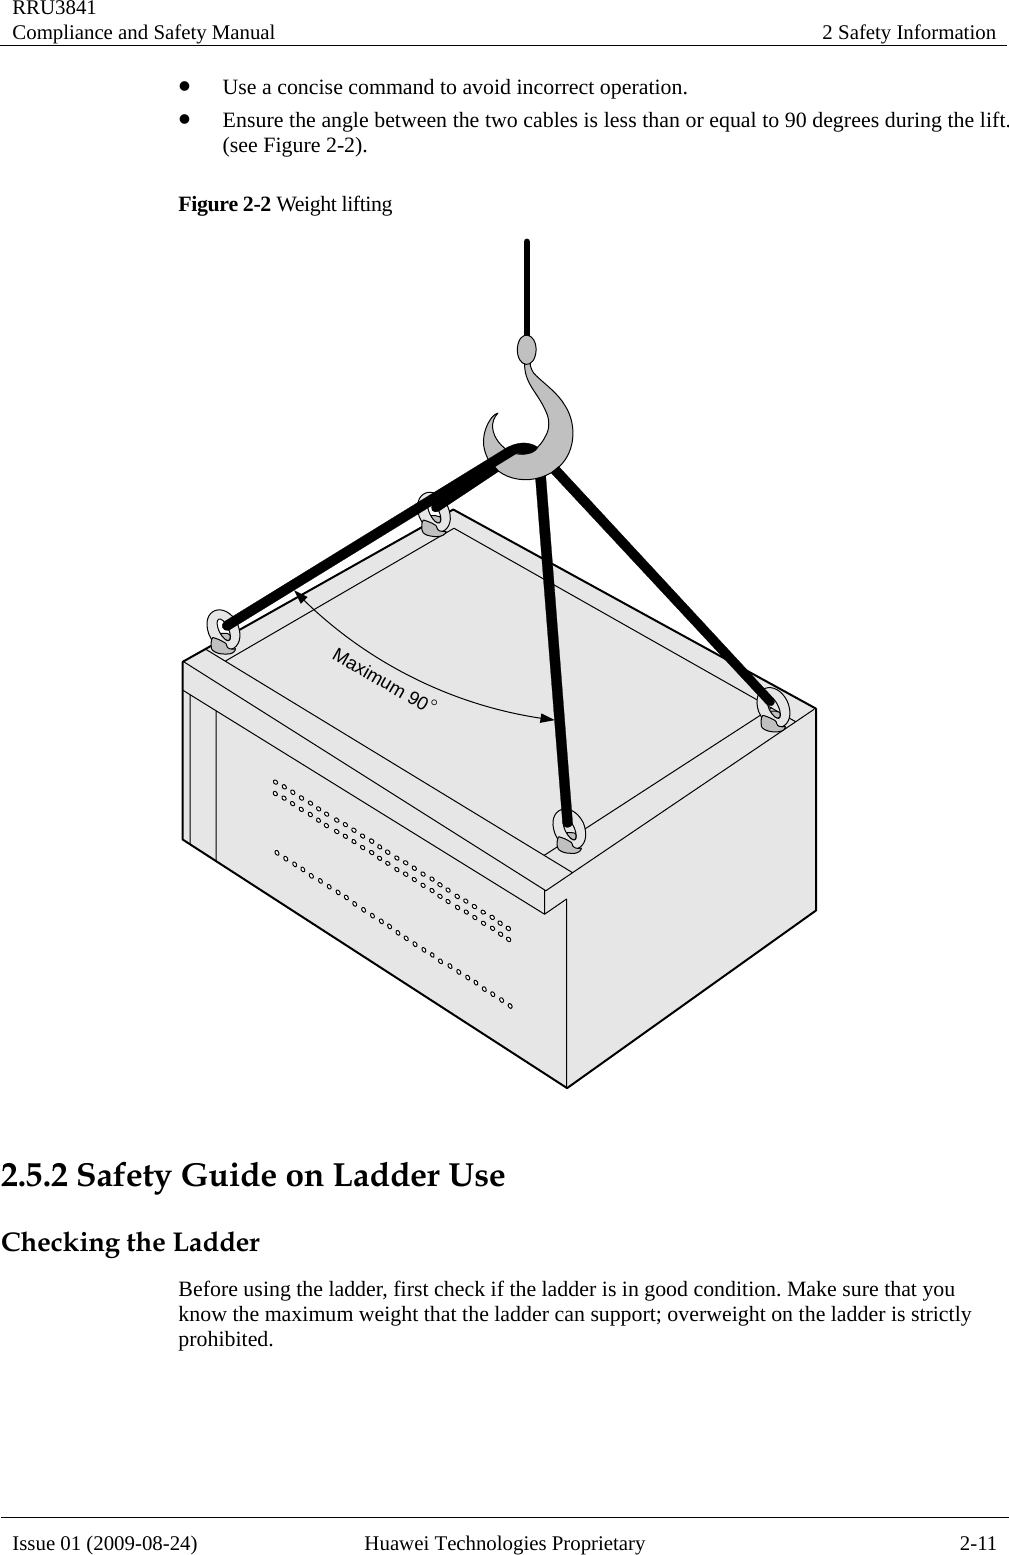 RRU3841 Compliance and Safety Manual  2 Safety Information  Issue 01 (2009-08-24)  Huawei Technologies Proprietary  2-11 z Use a concise command to avoid incorrect operation. z Ensure the angle between the two cables is less than or equal to 90 degrees during the lift. (see Figure 2-2). Figure 2-2 Weight lifting   2.5.2 Safety Guide on Ladder Use Checking the Ladder Before using the ladder, first check if the ladder is in good condition. Make sure that you know the maximum weight that the ladder can support; overweight on the ladder is strictly prohibited. Maximum 90°